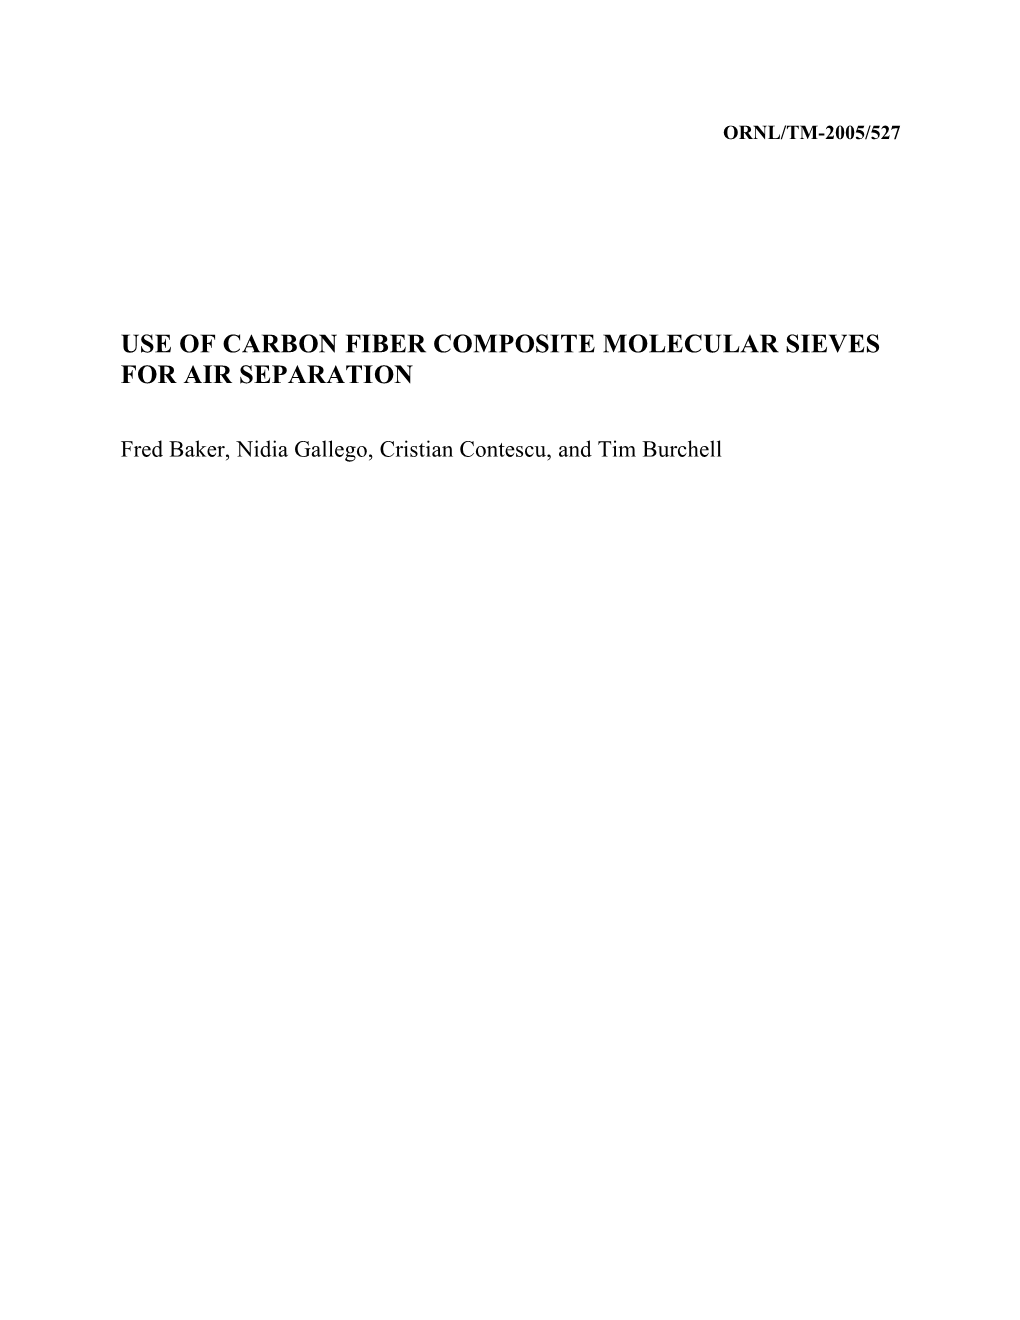 Use of Carbon Fiber Composite Molecular Sieves for Air Separation